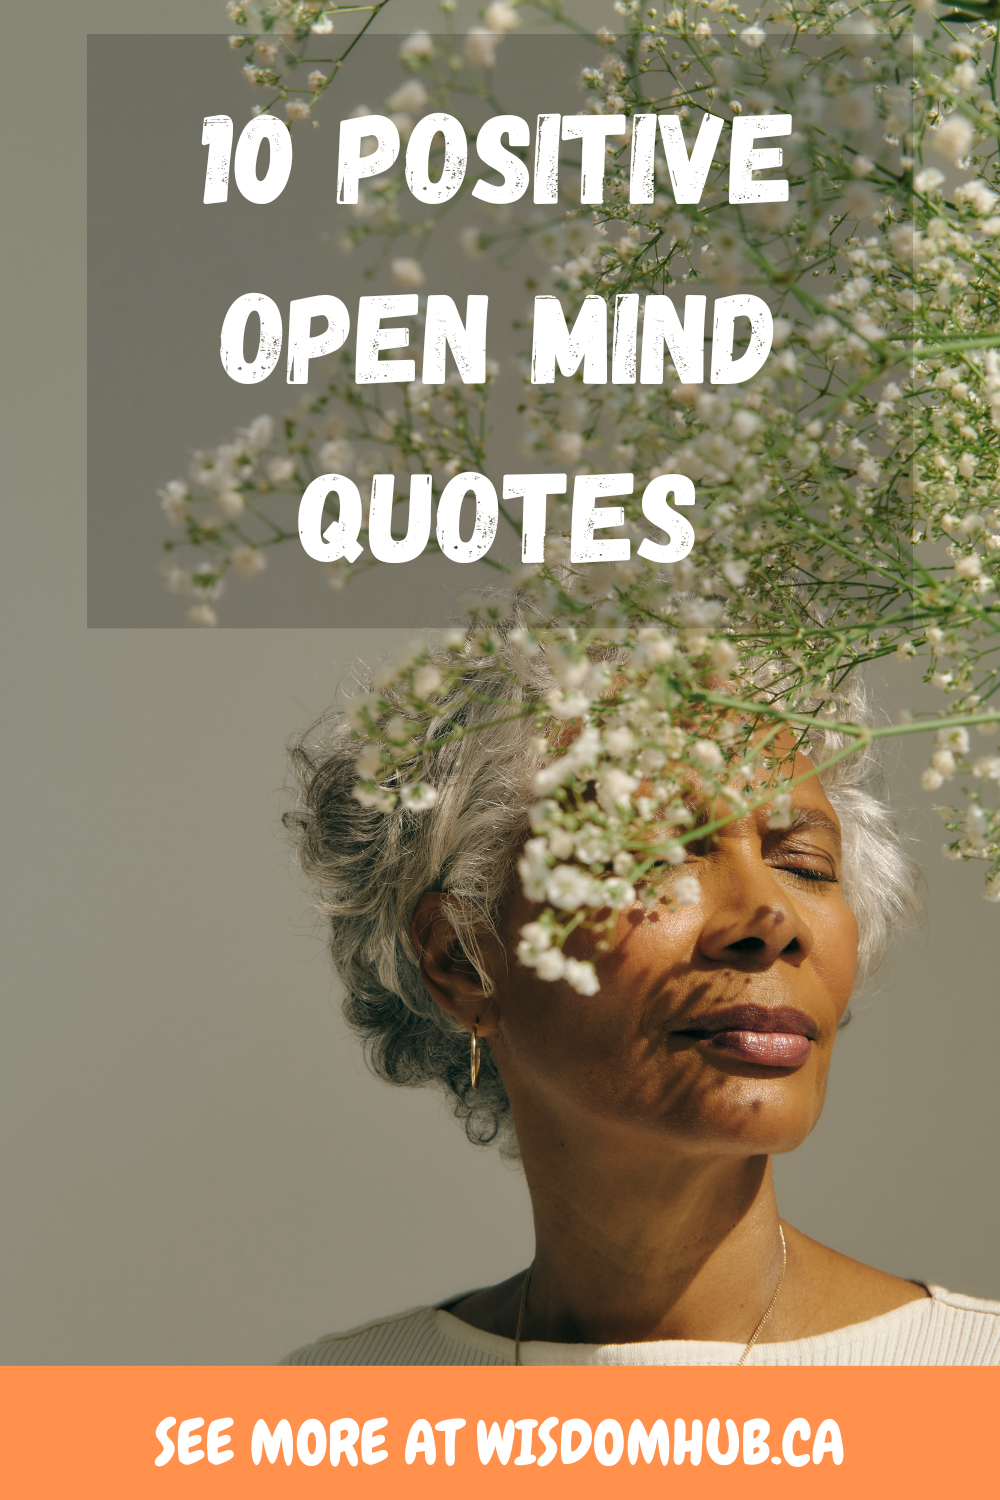 10 Positive Open Mind Quotes